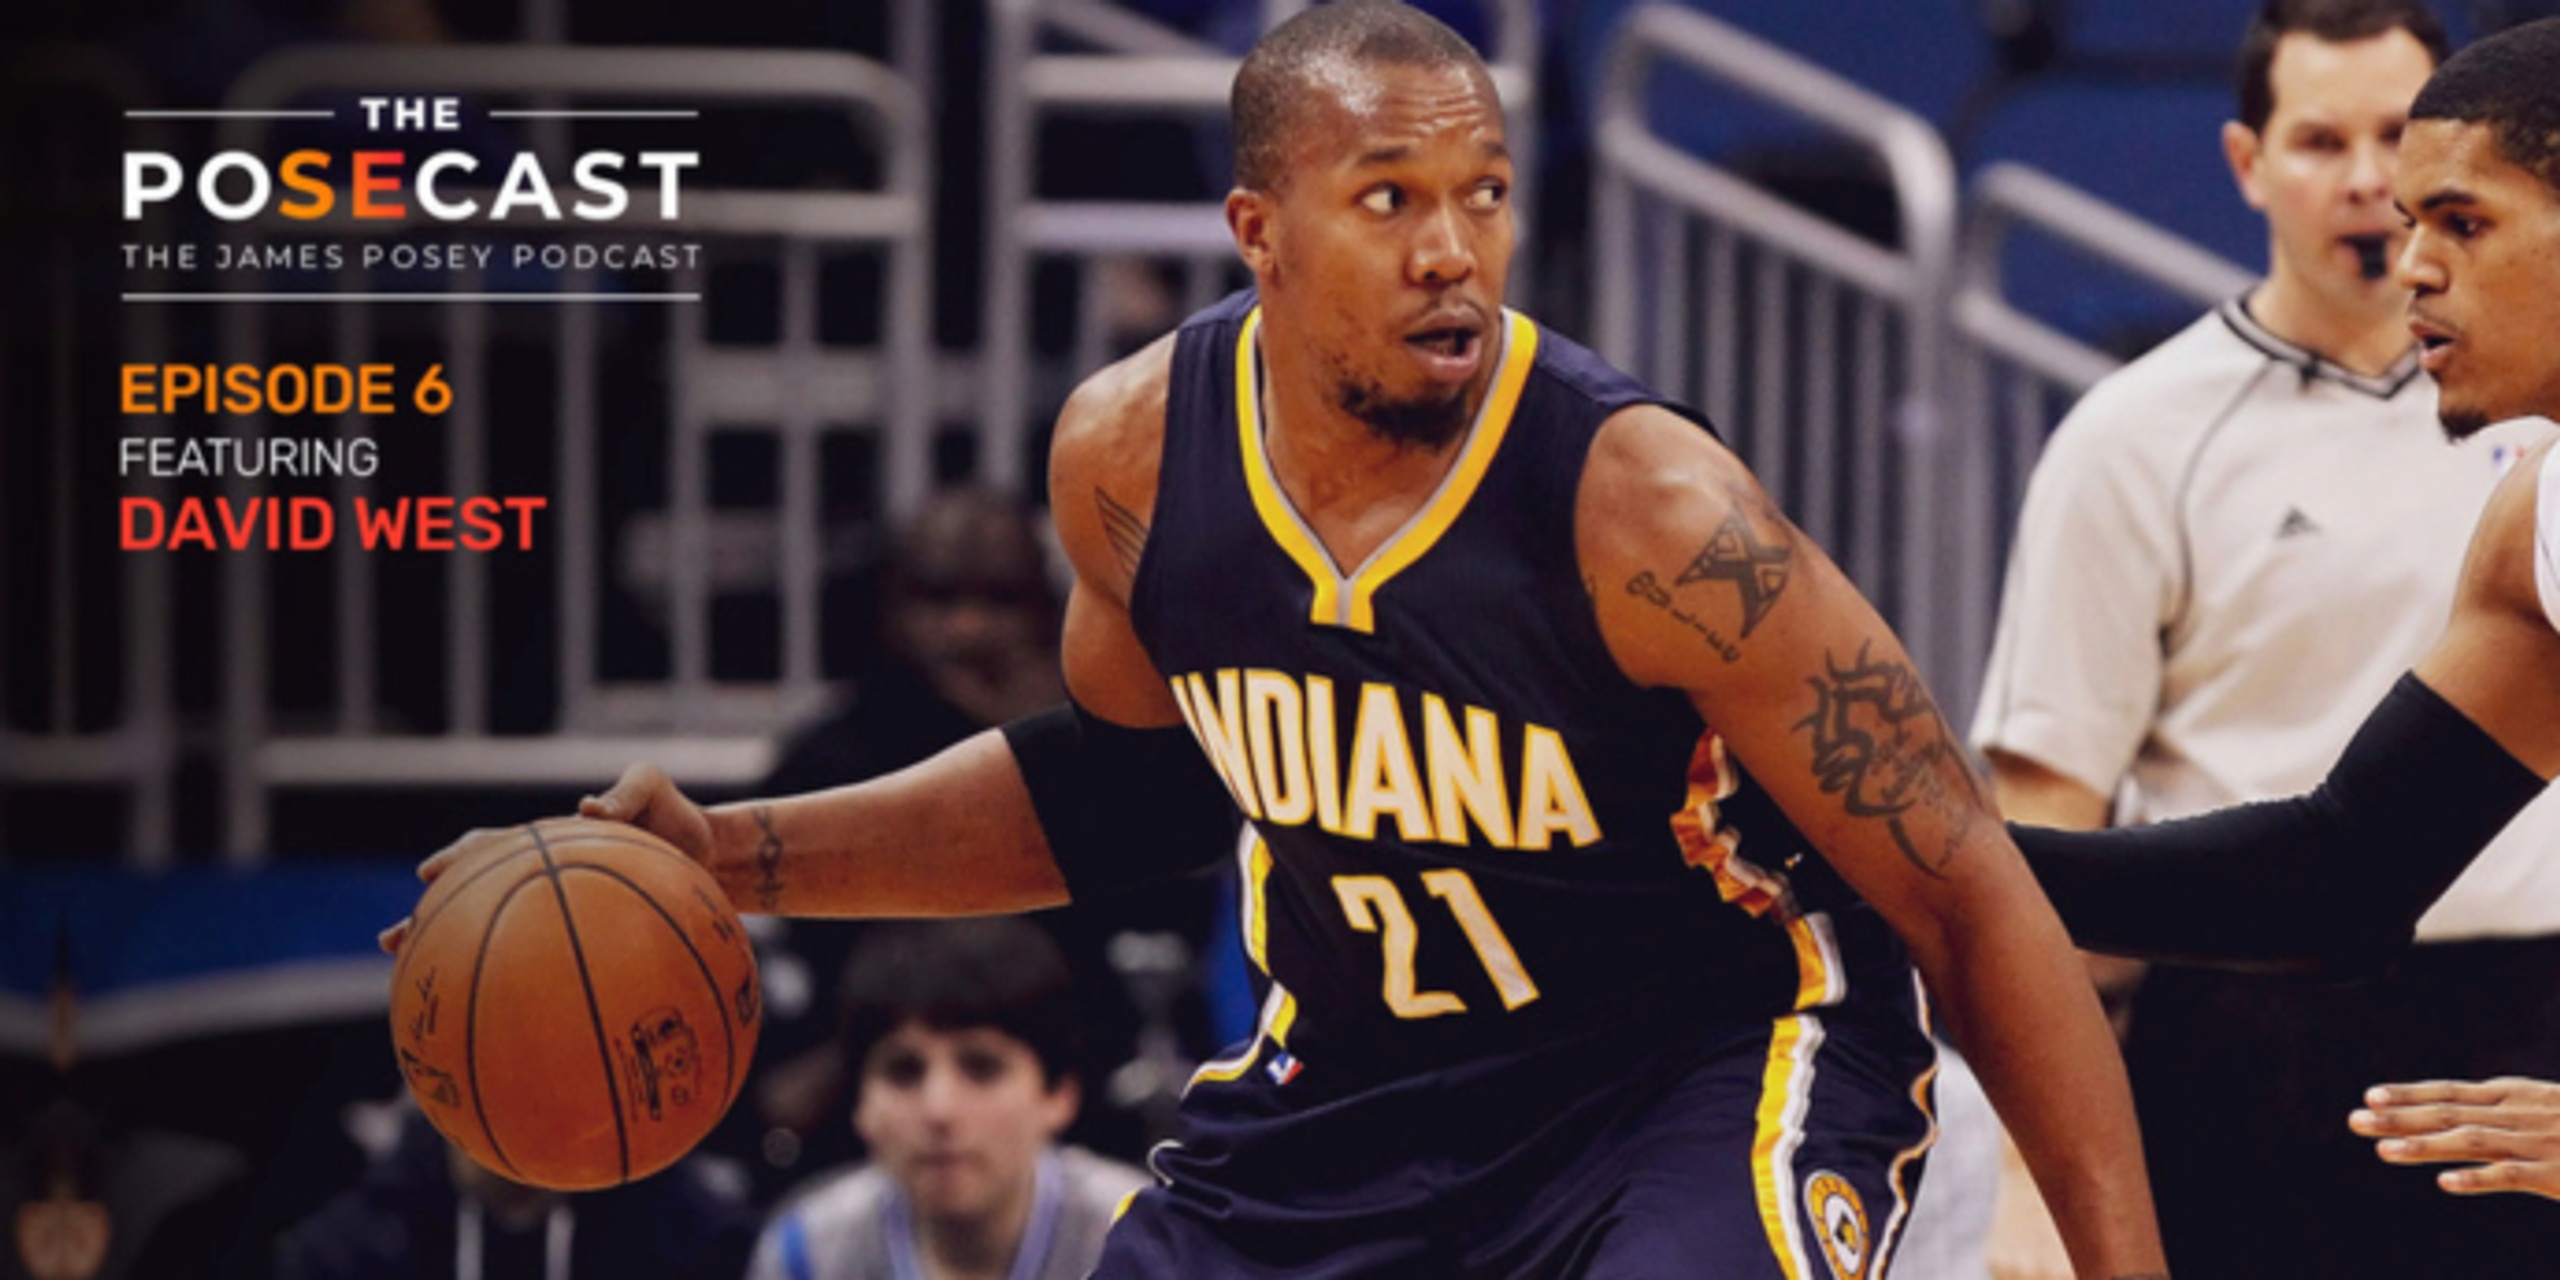 The Posecast: David West on NBA career, mentoring young players, more